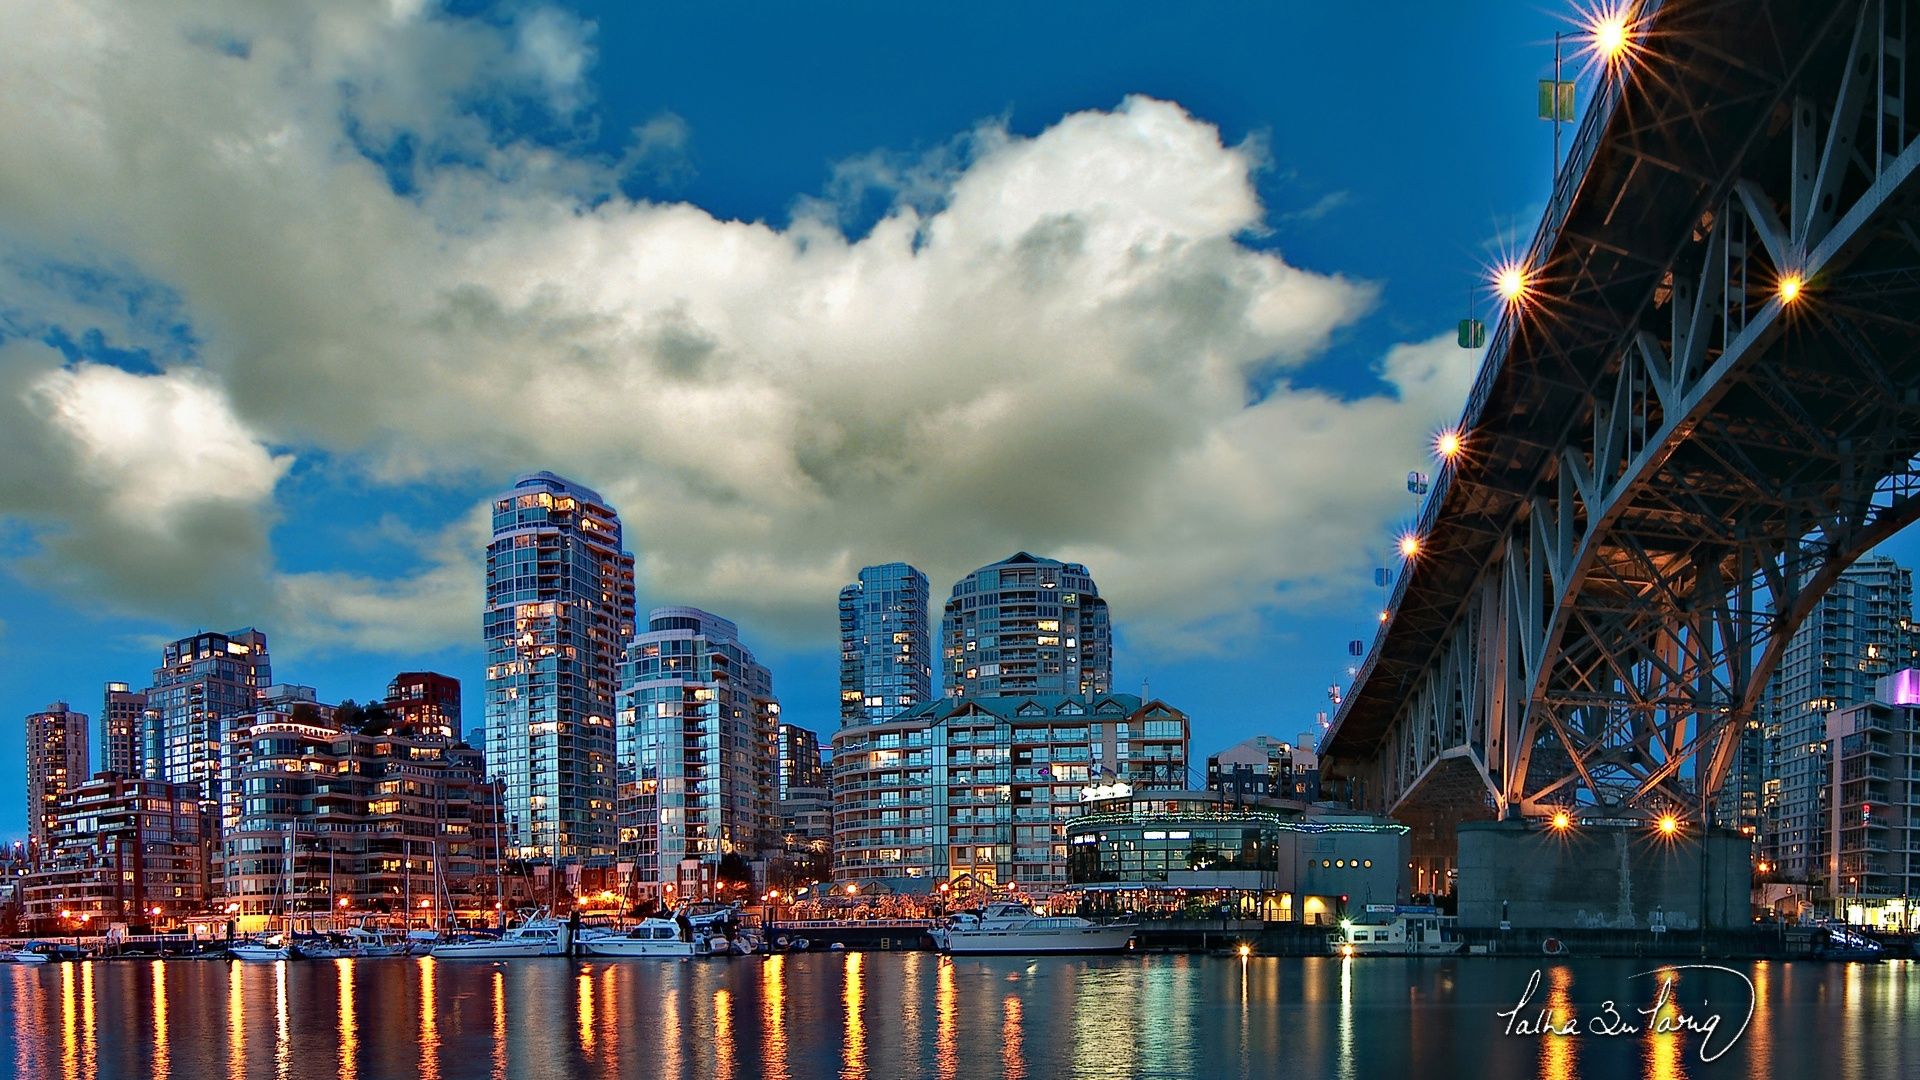 Full HD Wallpaper granville island business center side view vancouver canada, Desktop Background HD 1080p